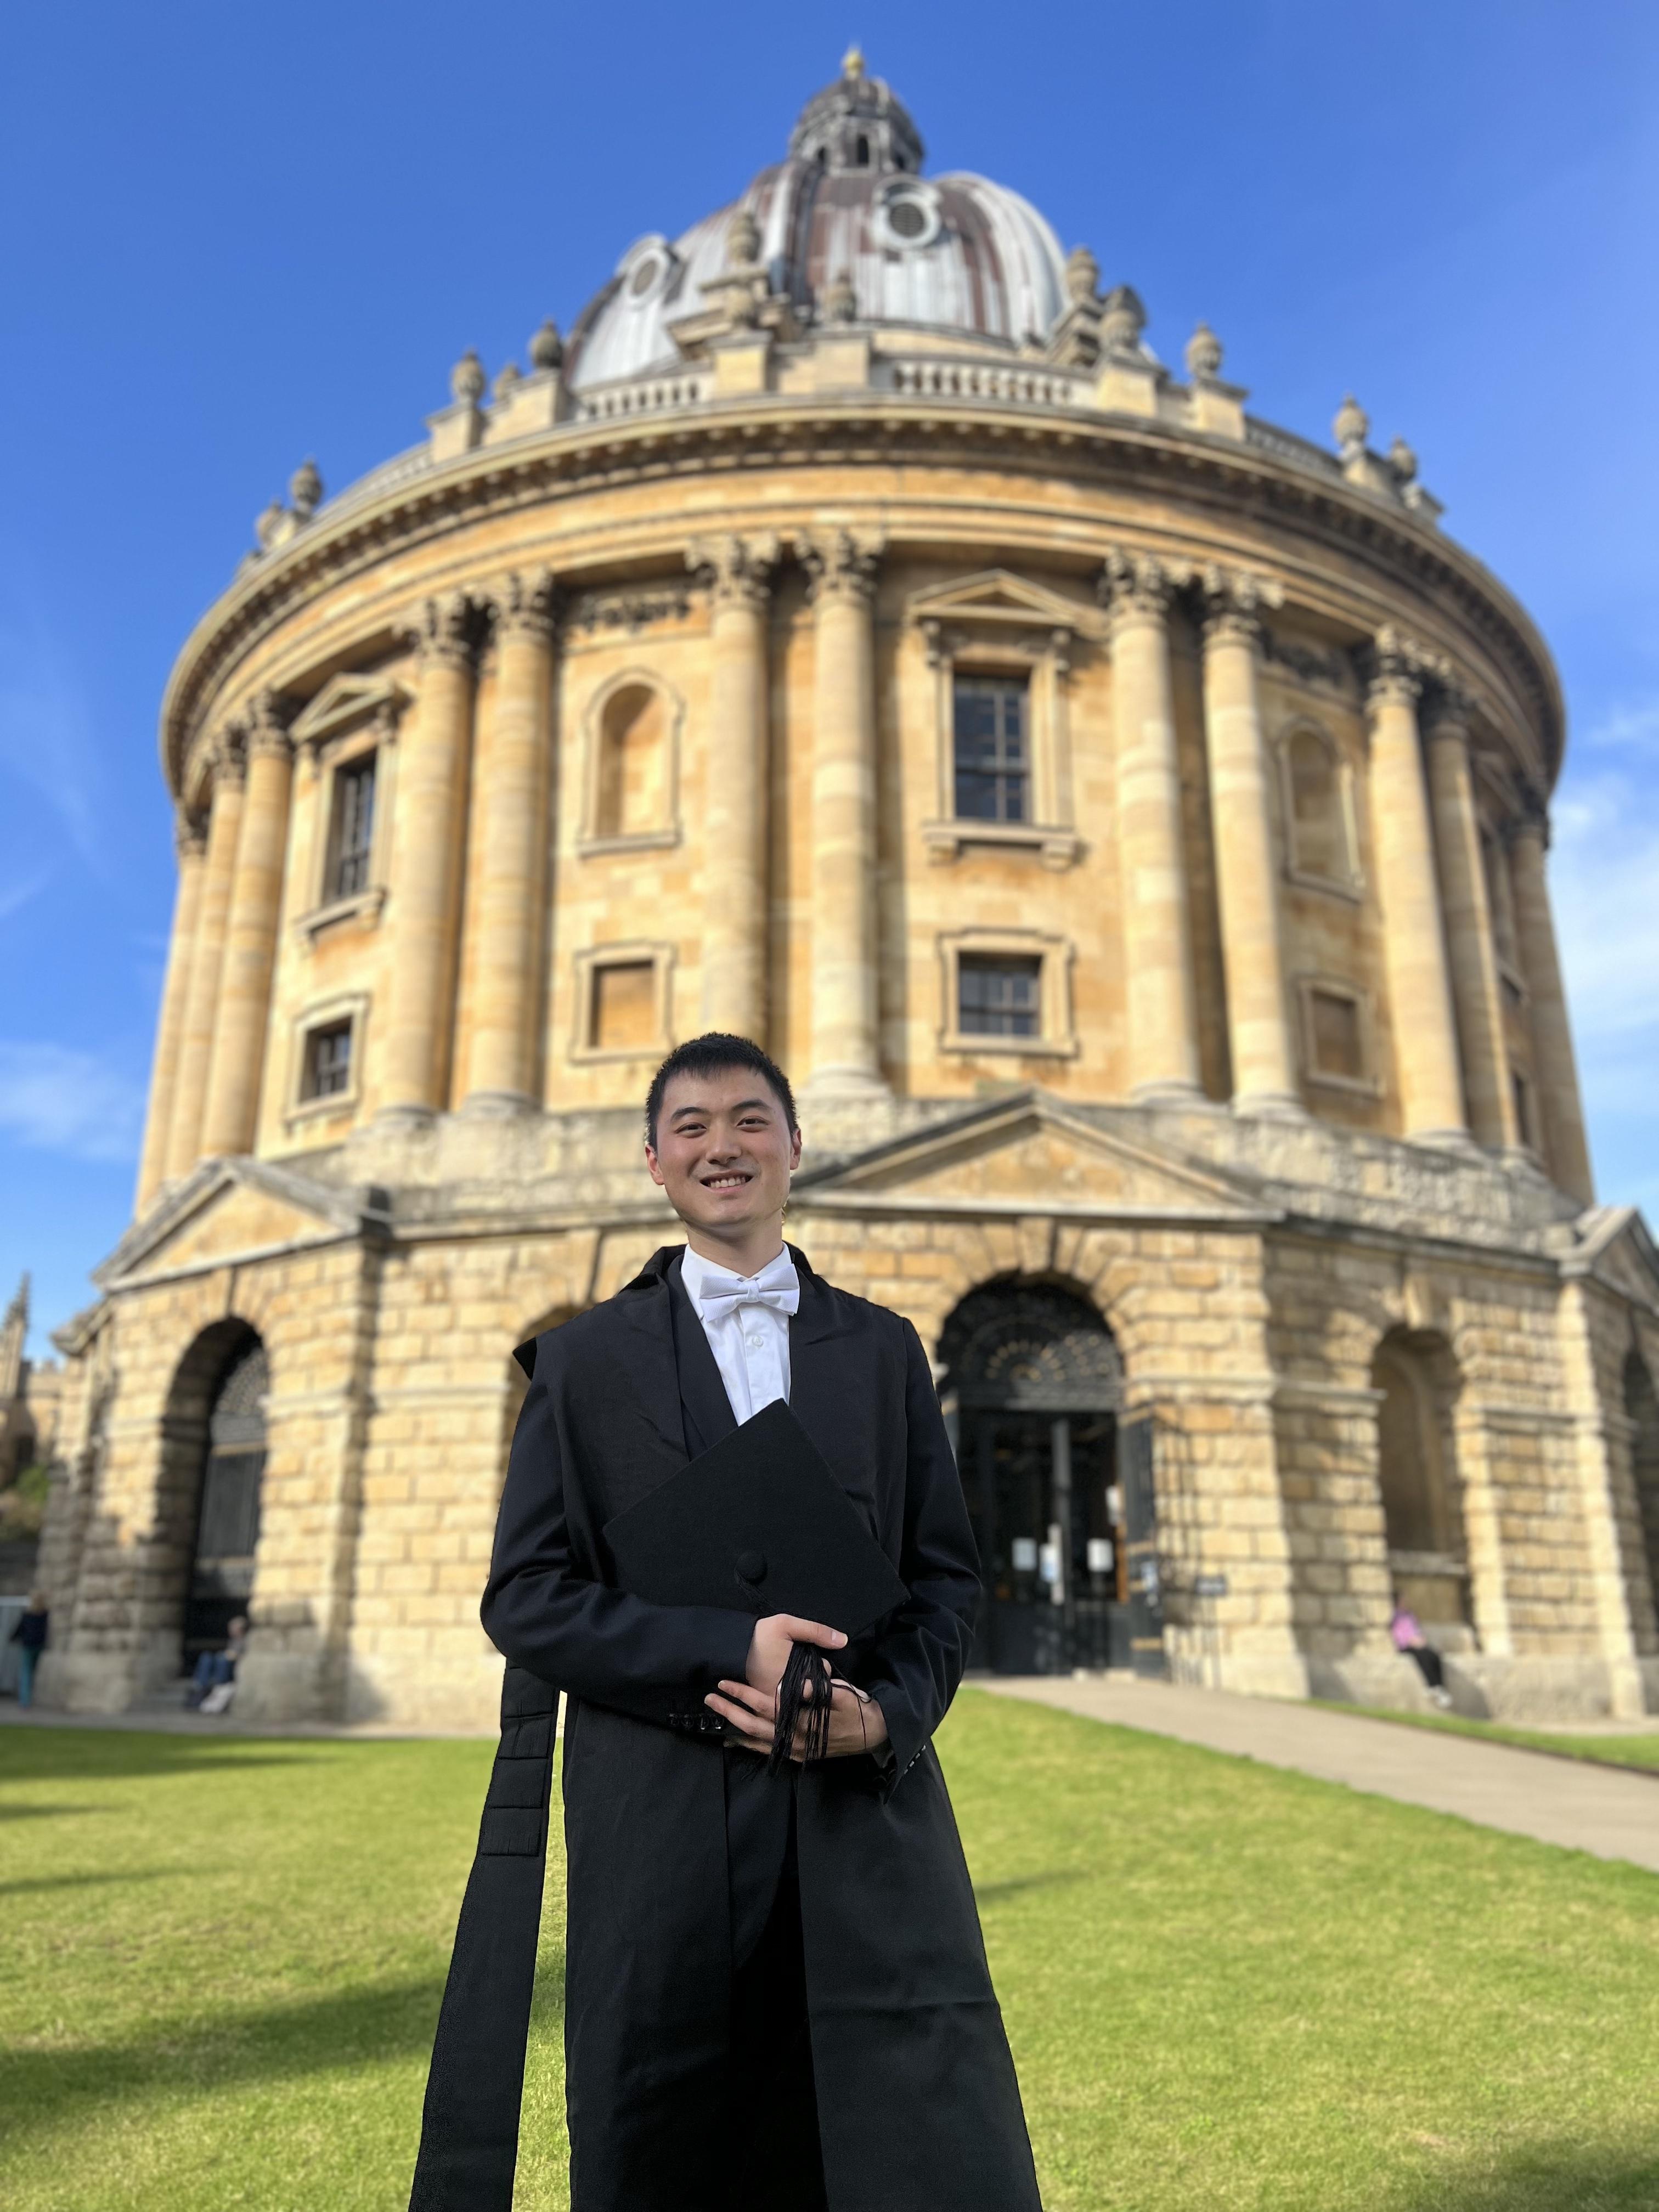 A man in sub-fusc standing in front of the Radcliffe Camera.